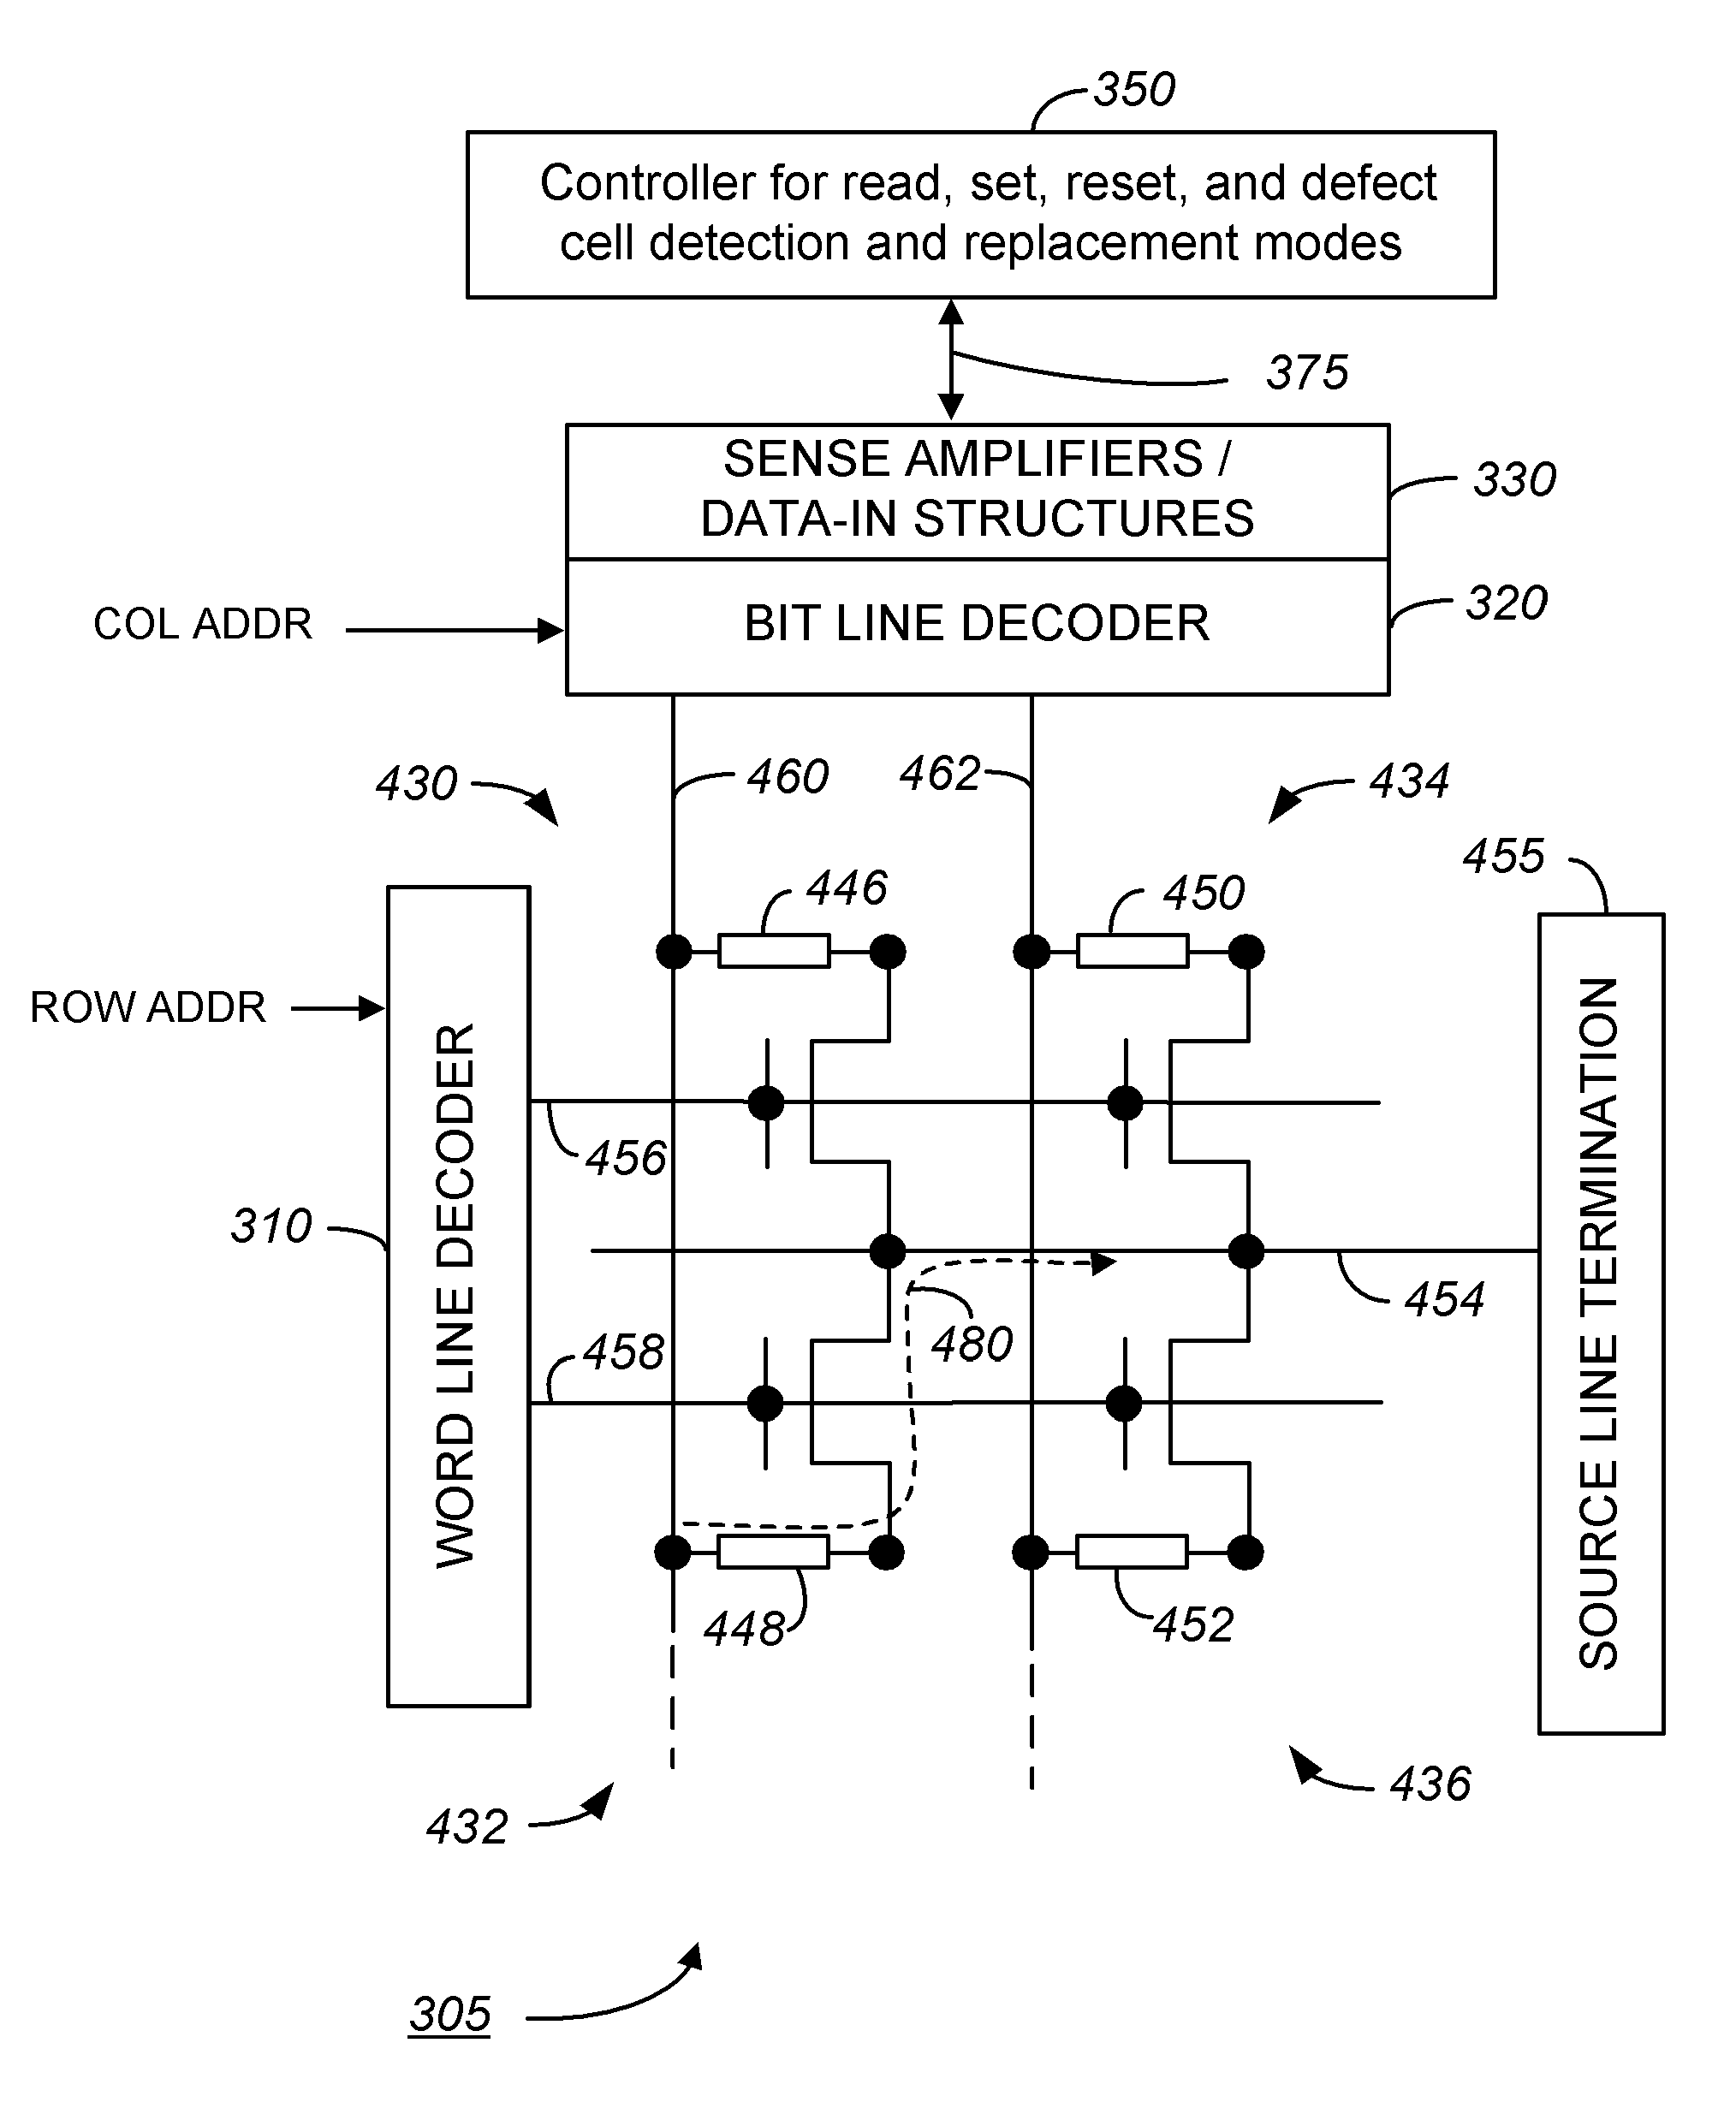 Methods and apparatus for reducing defect bits in phase change memory